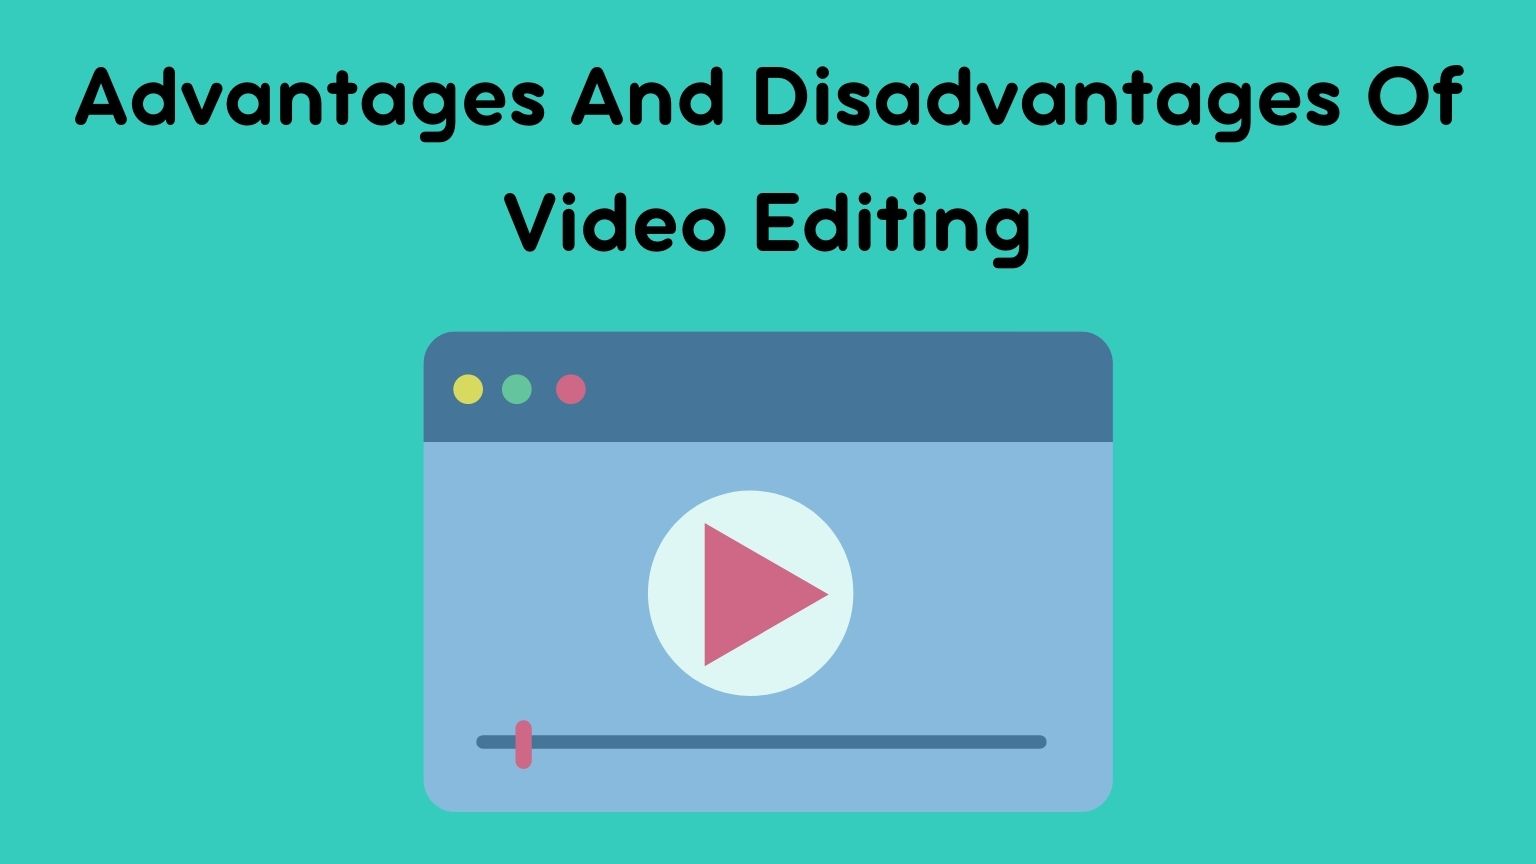 Advantages And Disadvantages Of Video Editing